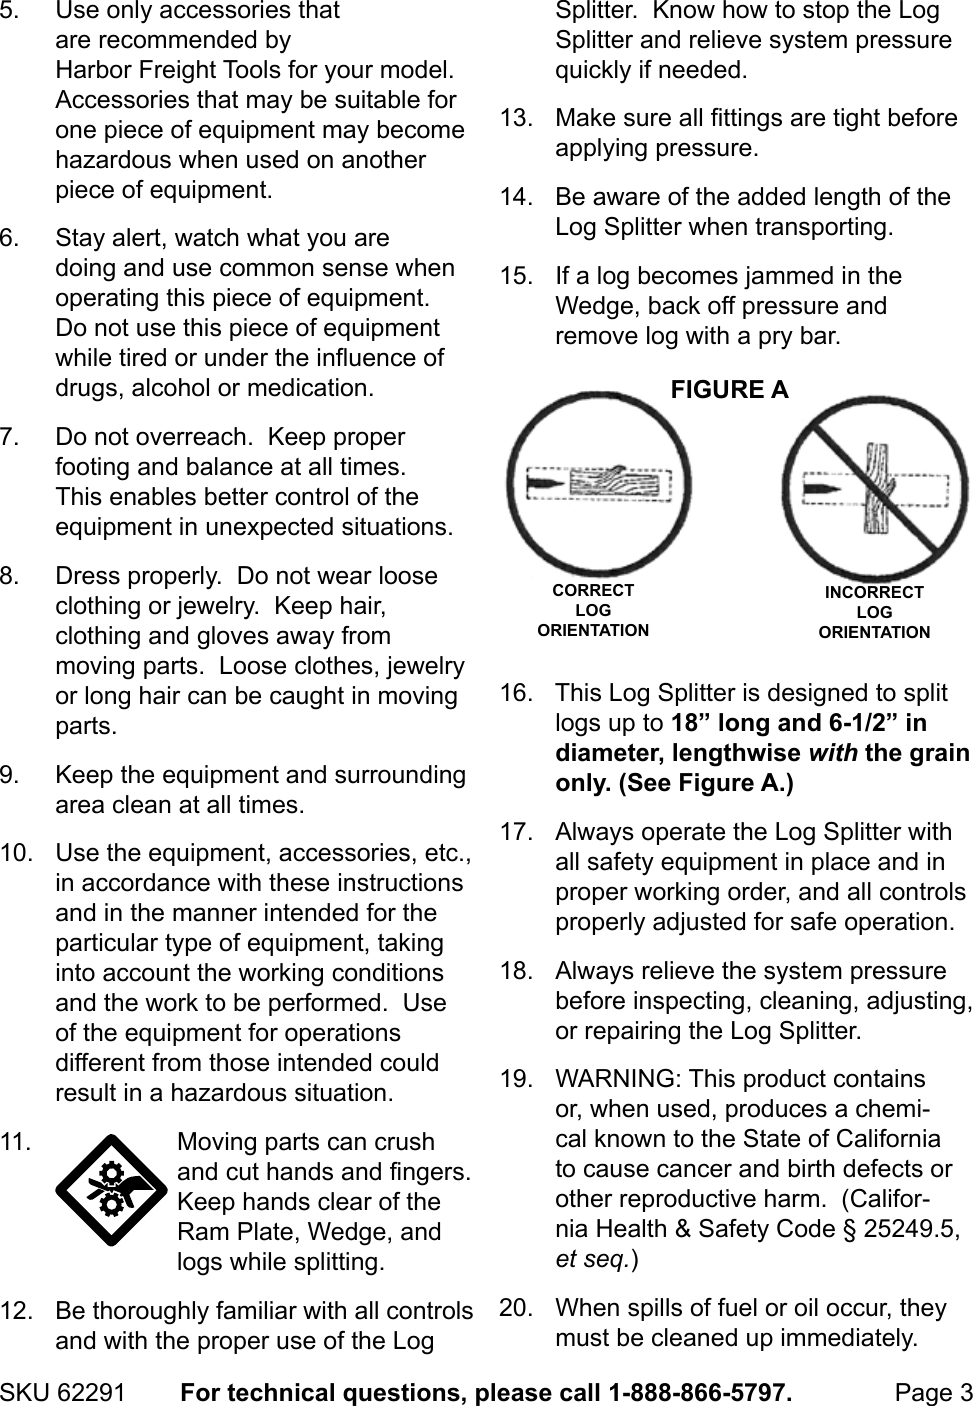 Page 3 of 12 - Manual For The 62291 10 Ton Hydraulic Log Splitter